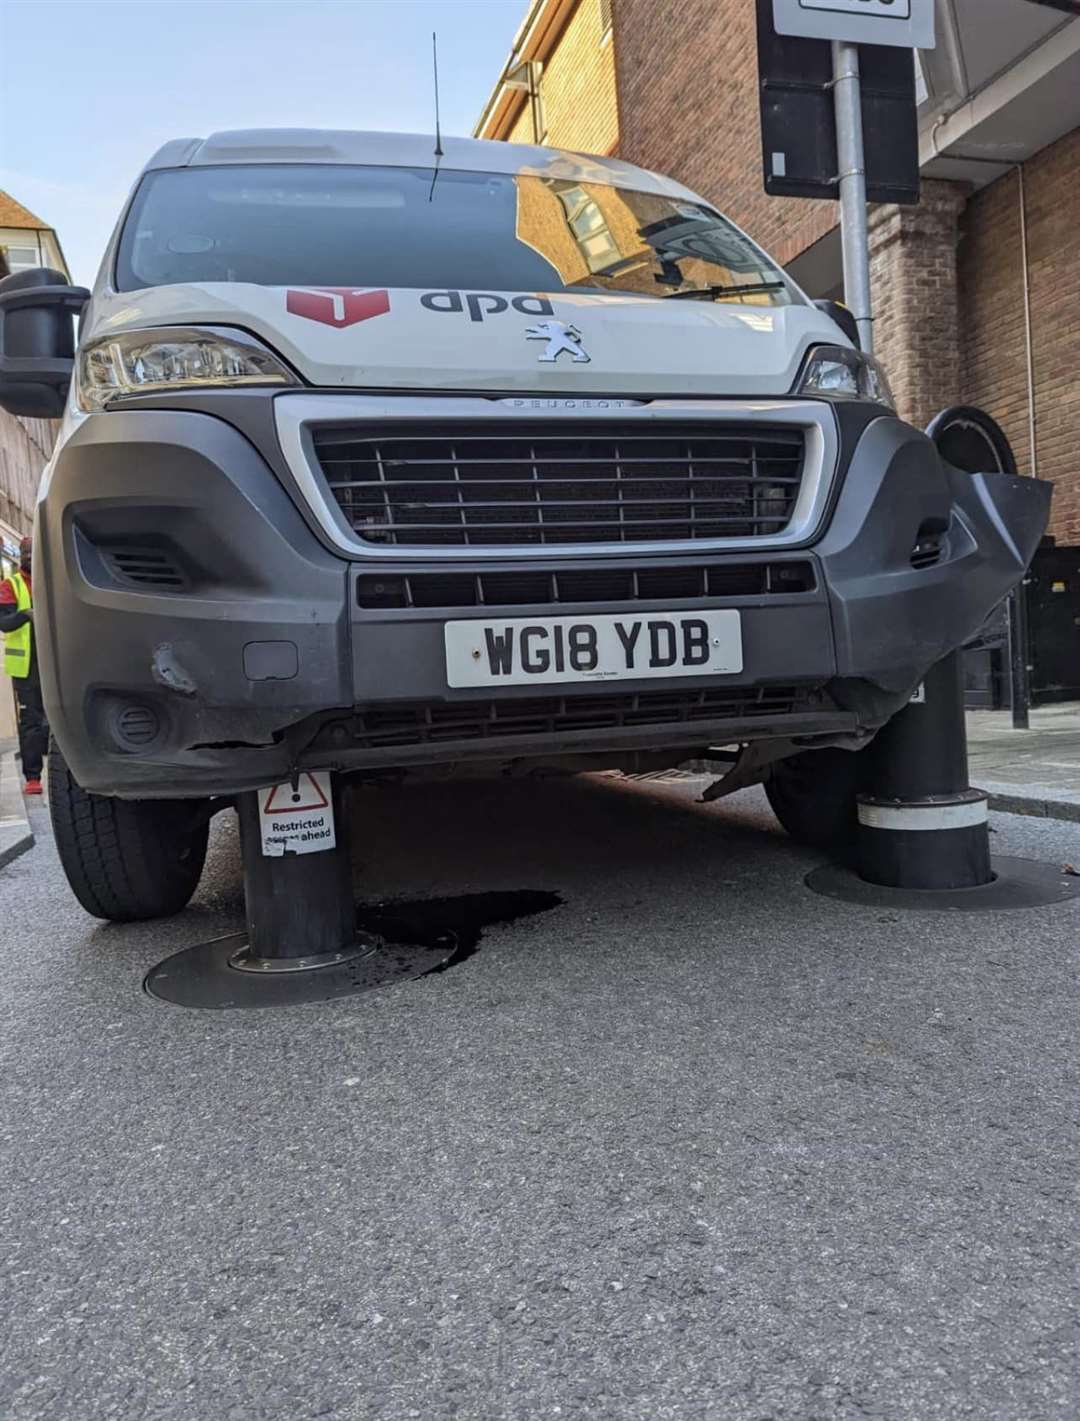 The van wedged onto the anti-terror bollards. Picture: Graham Thurlow